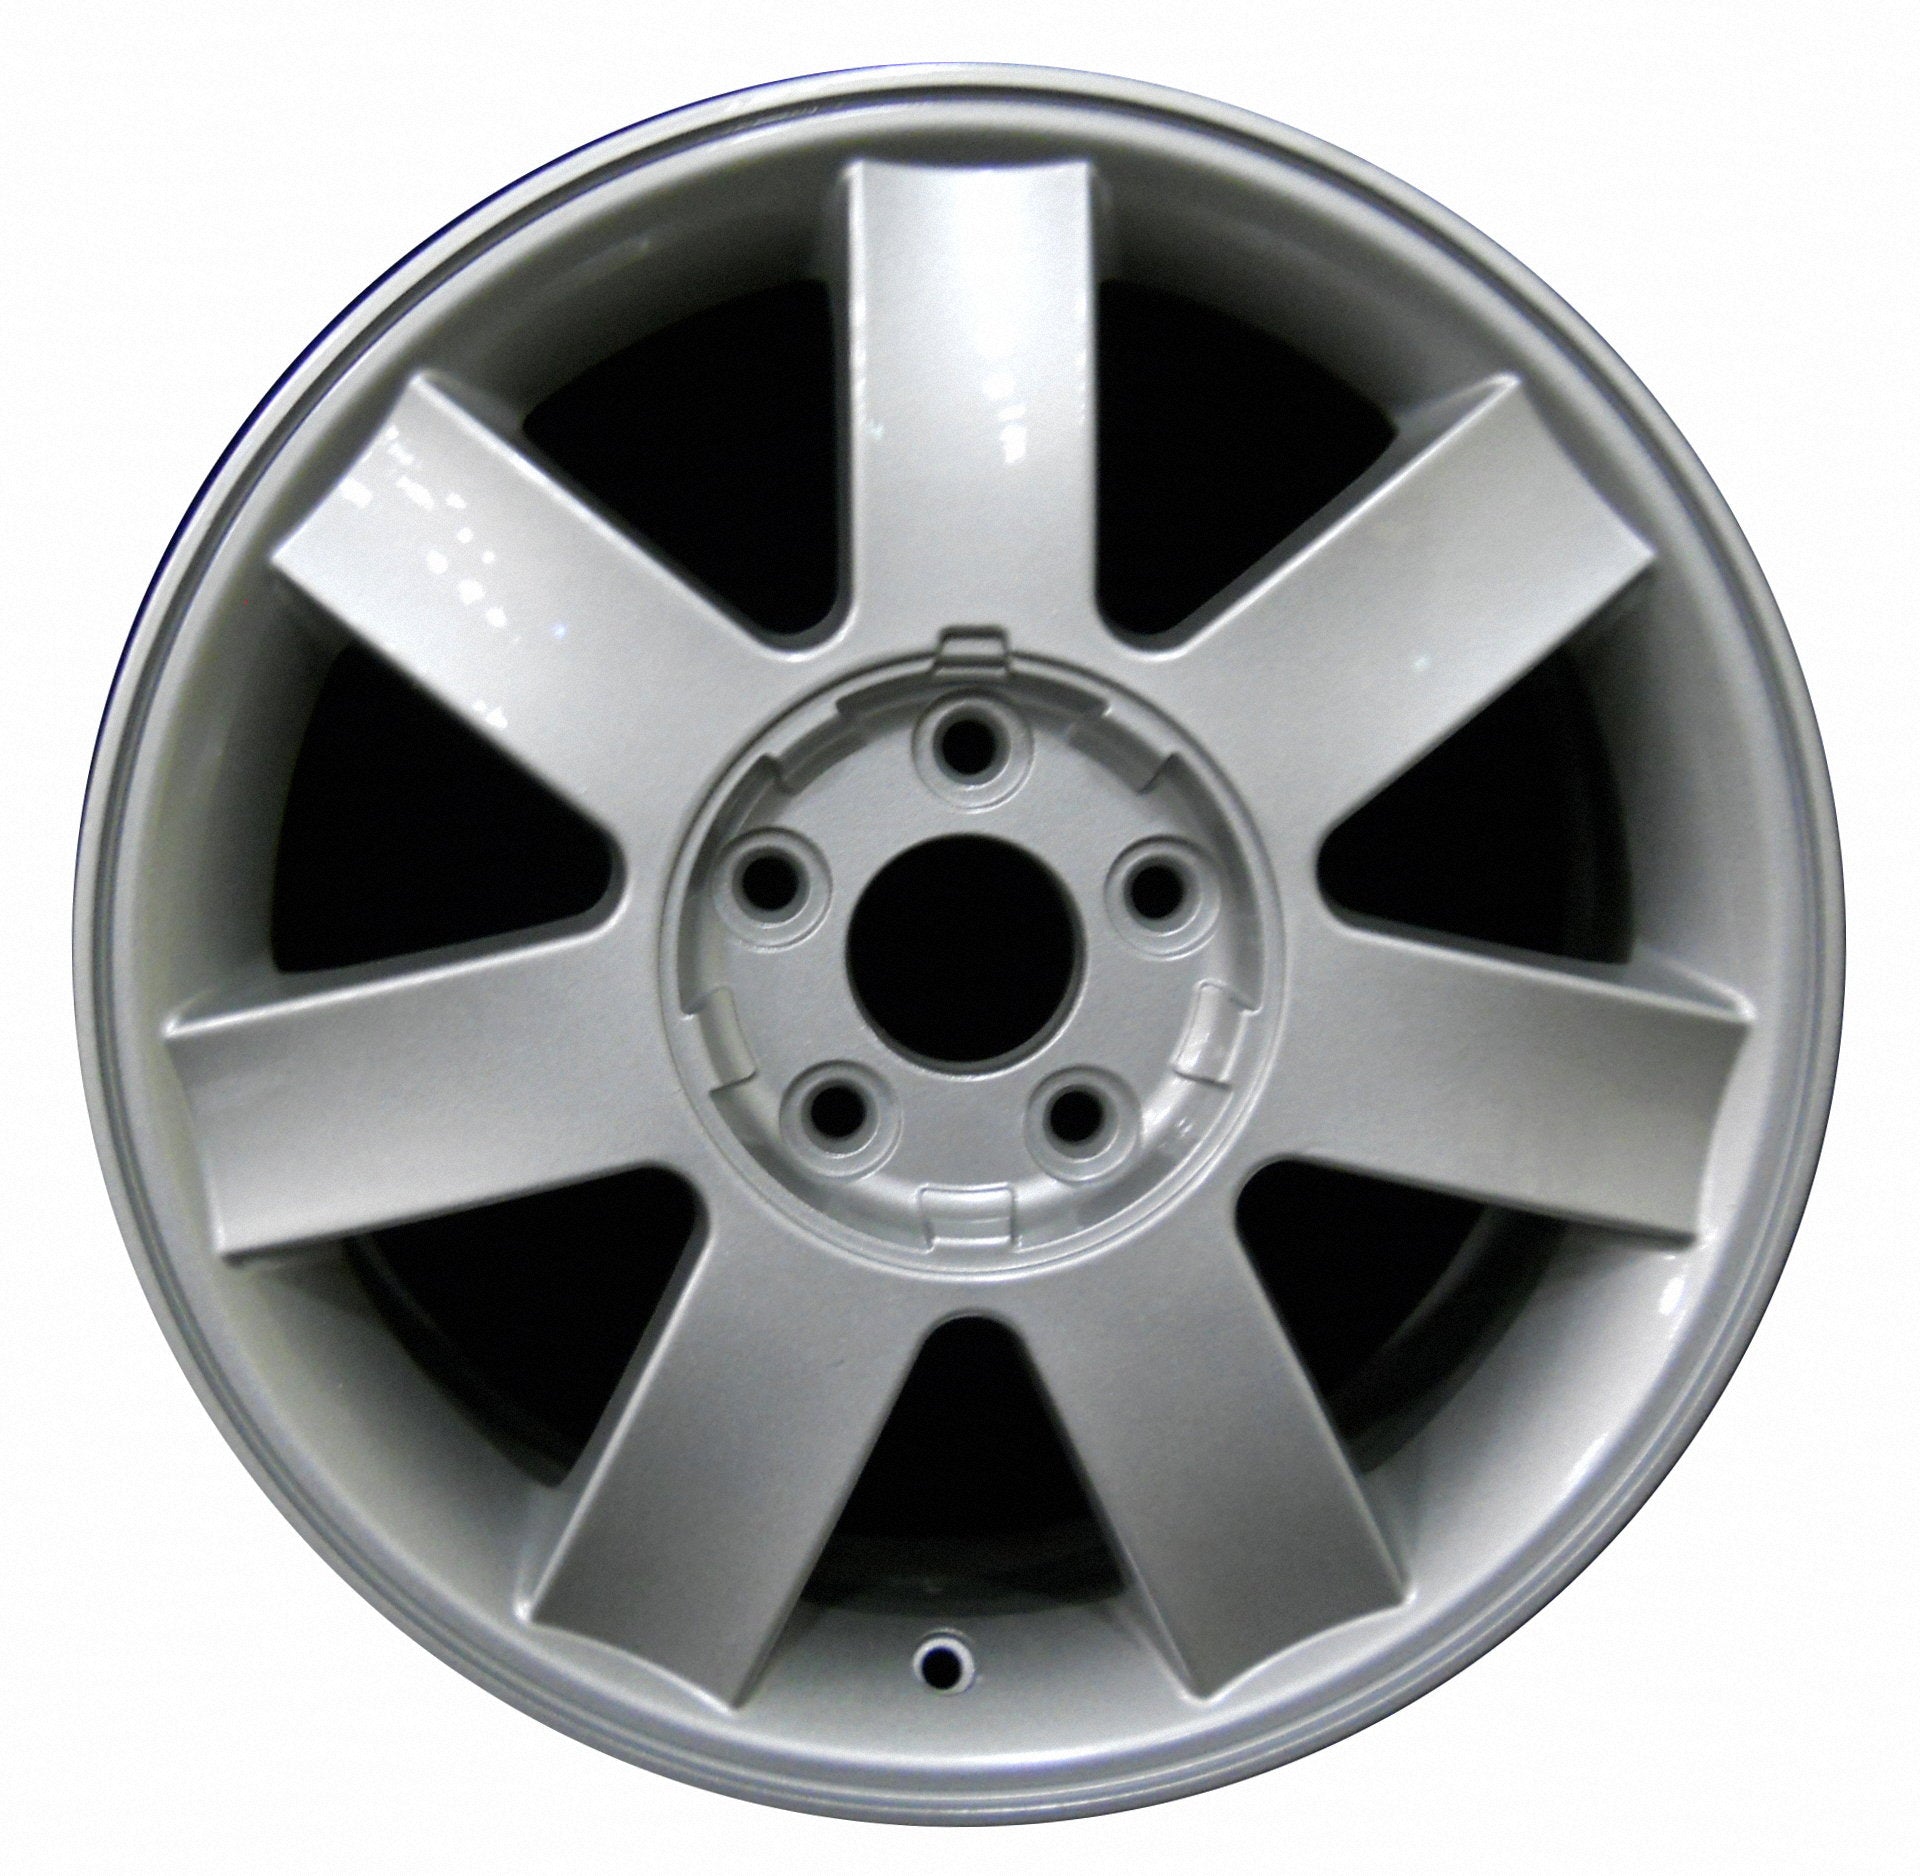 Ford Freestyle  2005, 2006, 2007 Factory OEM Car Wheel Size 17x7 Alloy WAO.3572.PS02.FF